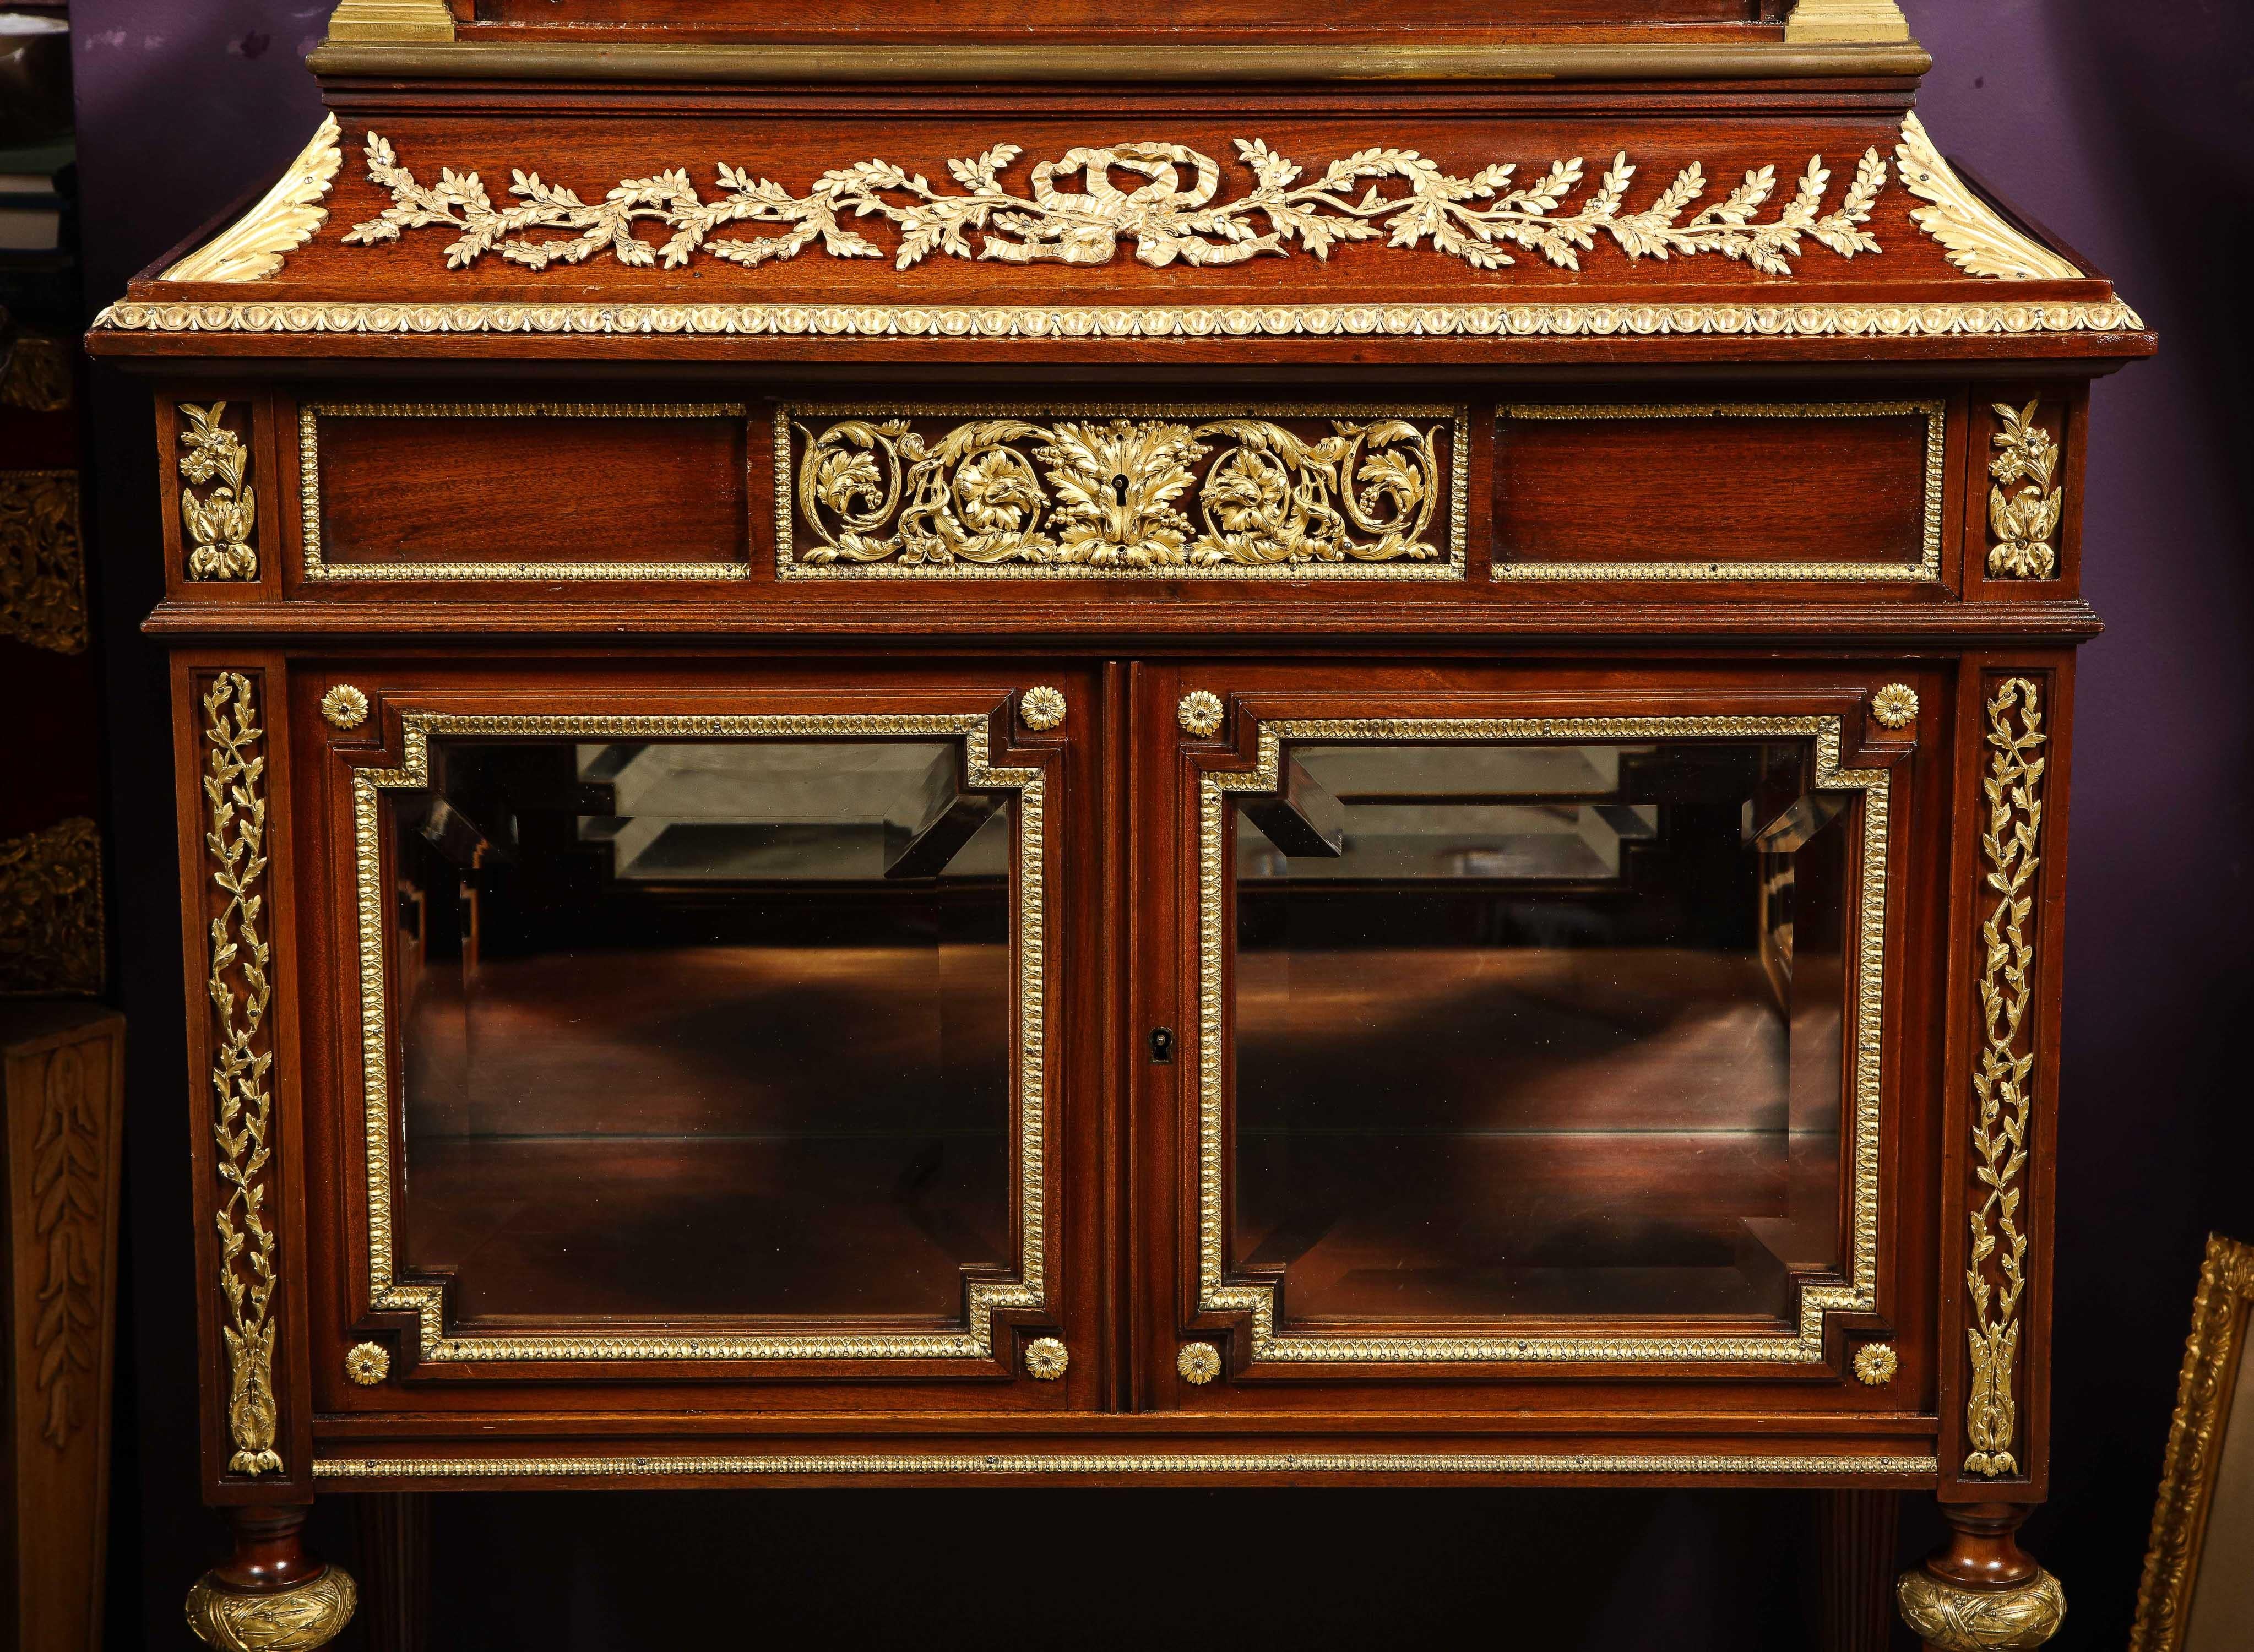 19th Century Exquisite French Ormolu-Mounted Mahogany and Glass Vitrine Cabinet For Sale